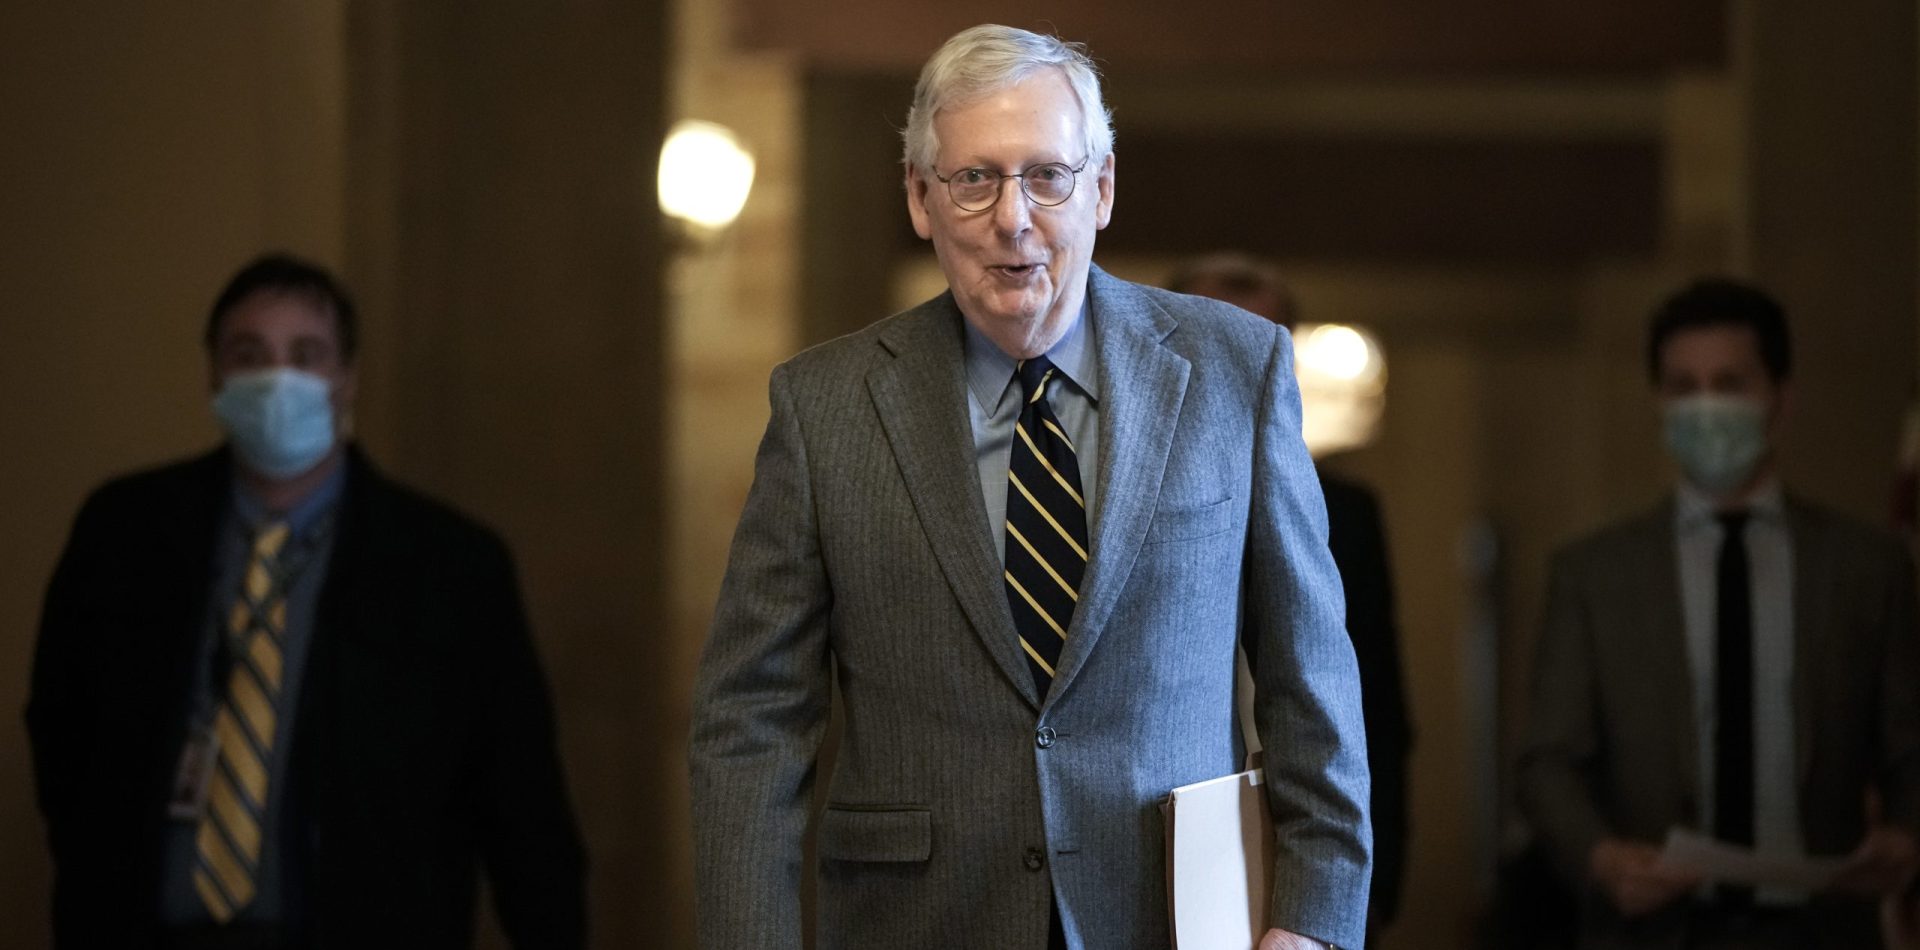 WASHINGTON, DC - JANUARY 5: Senate Minority Leader Mitch McConnell (R-KY) leaves his office and walks to the Senate floor at the U.S. Capitol on January 5, 2022 in Washington, DC. Congress is preparing will mark the one year anniversary of the January 6 Capitol riot on Thursday. (Photo by Drew Angerer/Getty Images)